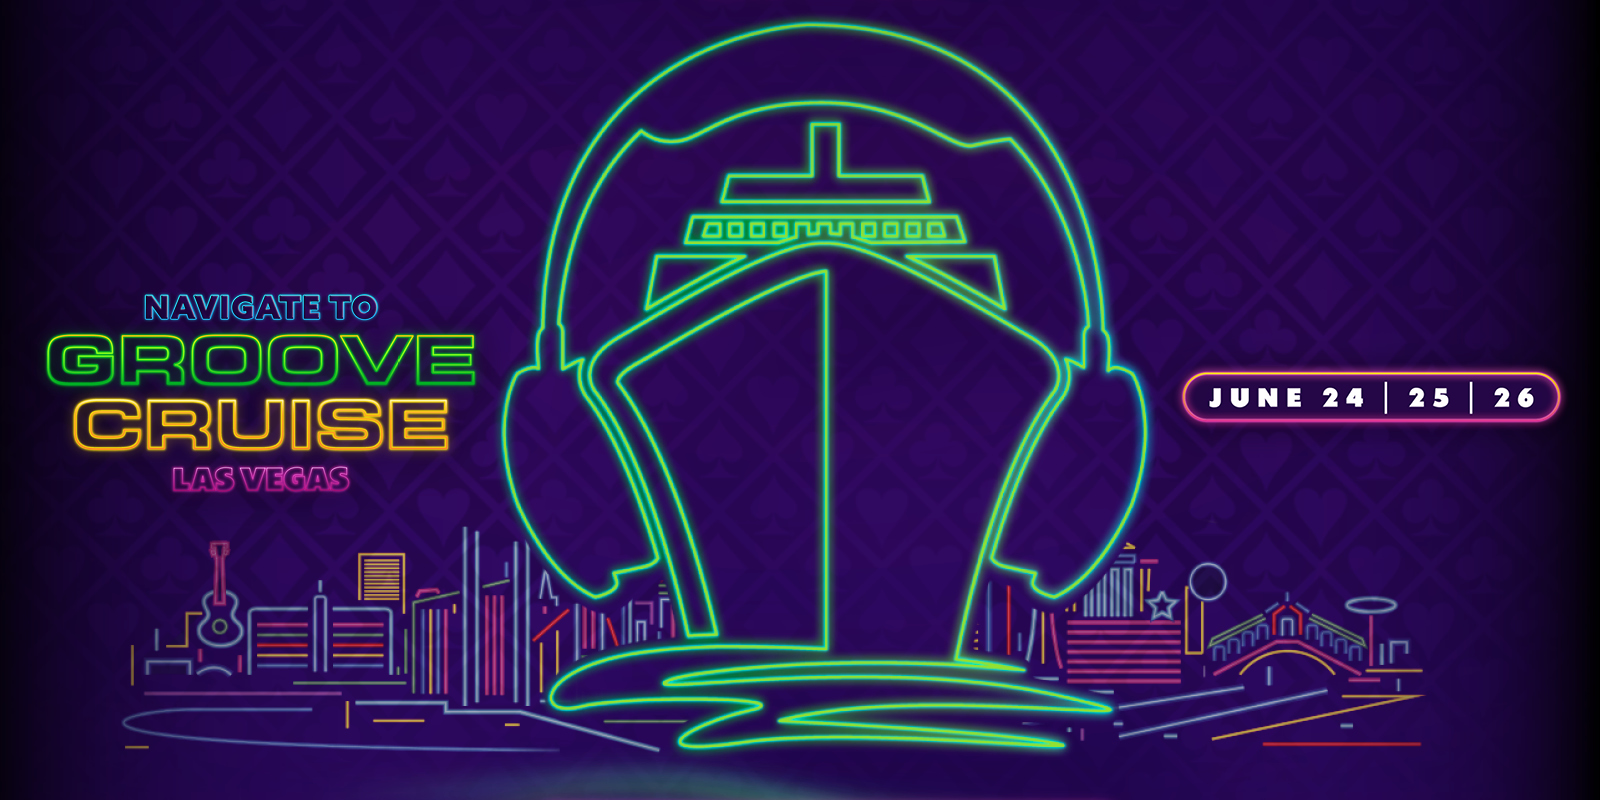 Groove Cruise Visual. This shows a cruise ship with headphones on and june 24, 25 and june 26